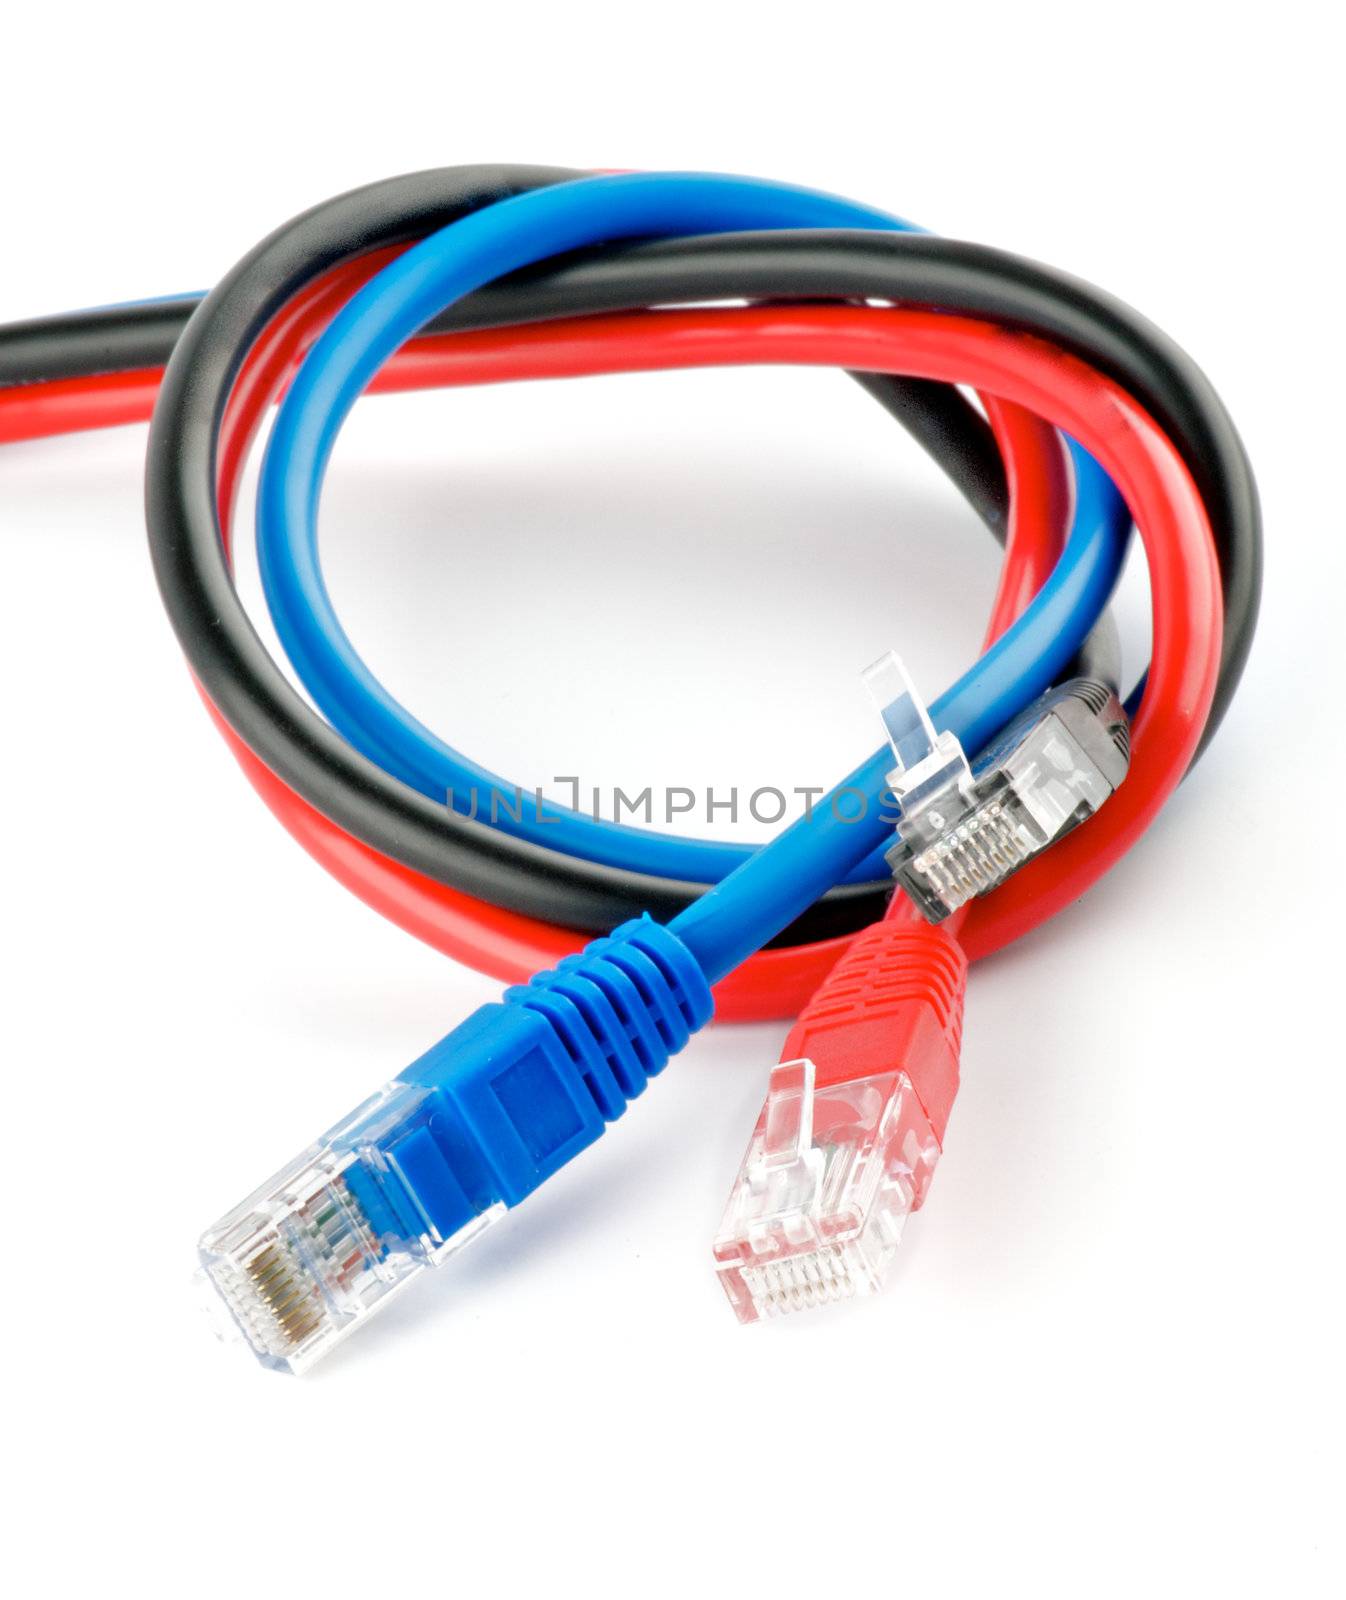 Black, red and blue UTP cords with RJ-45 Connectors isolated on white background